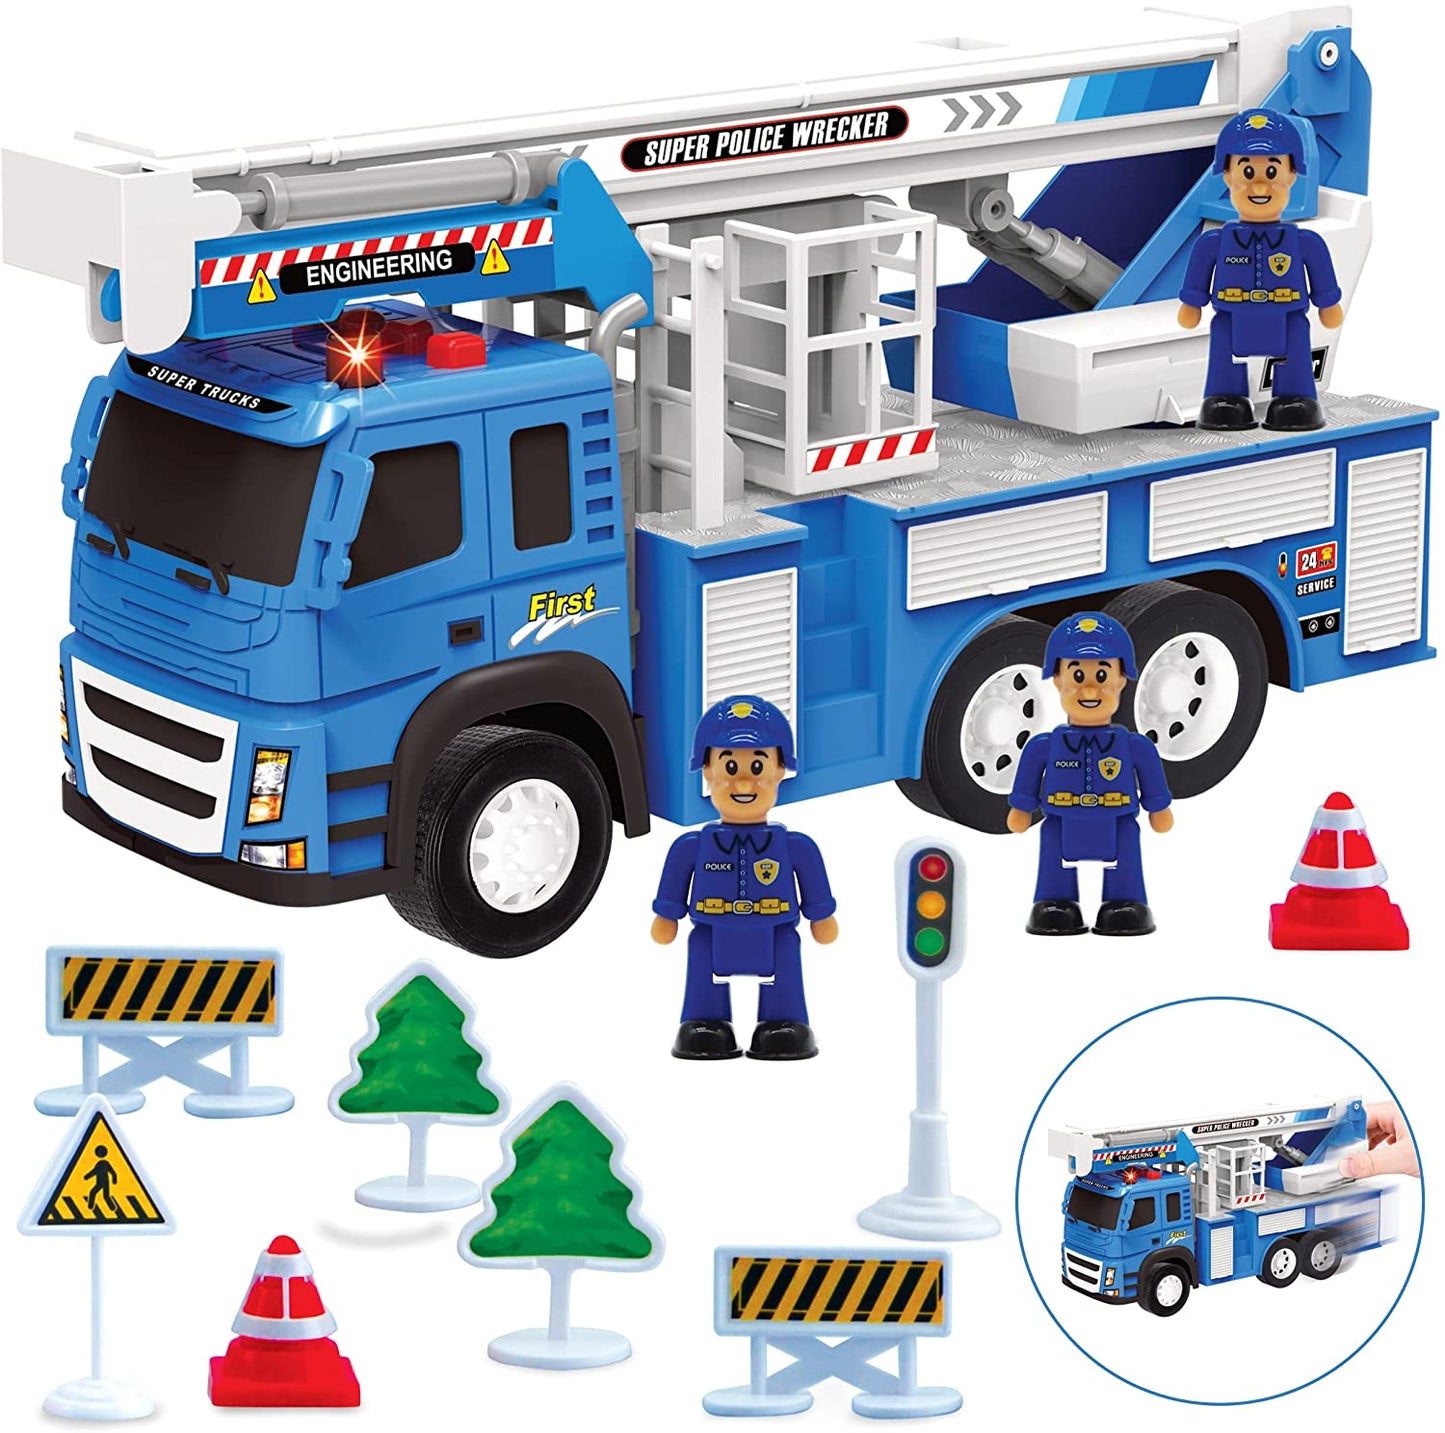 1:12 Scale Police Truck Toy Playset with Realistic Vehicle, Police Officers and Road Signs